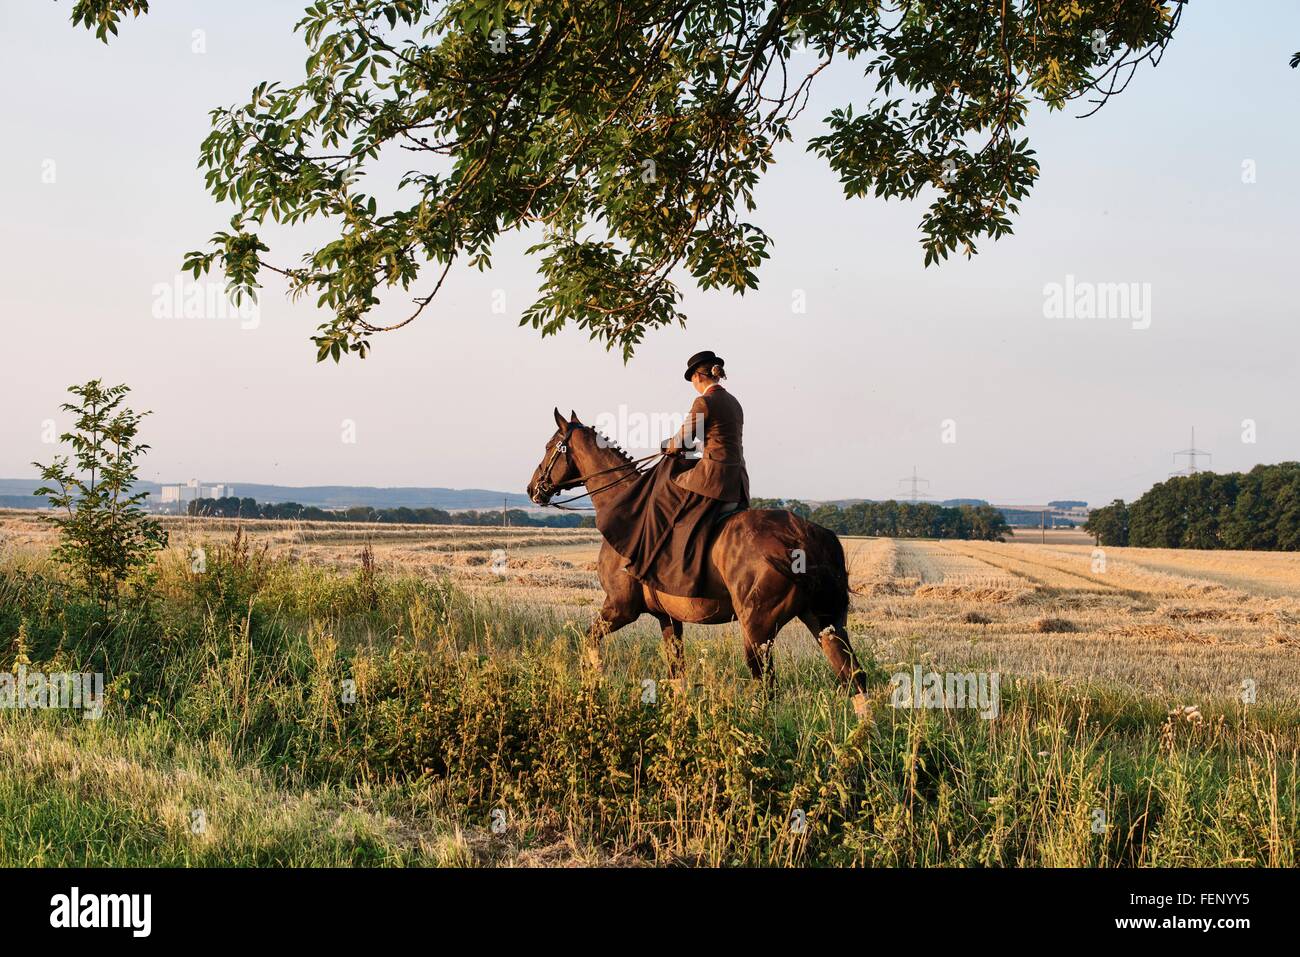 Woman riding horse in field Stock Photo